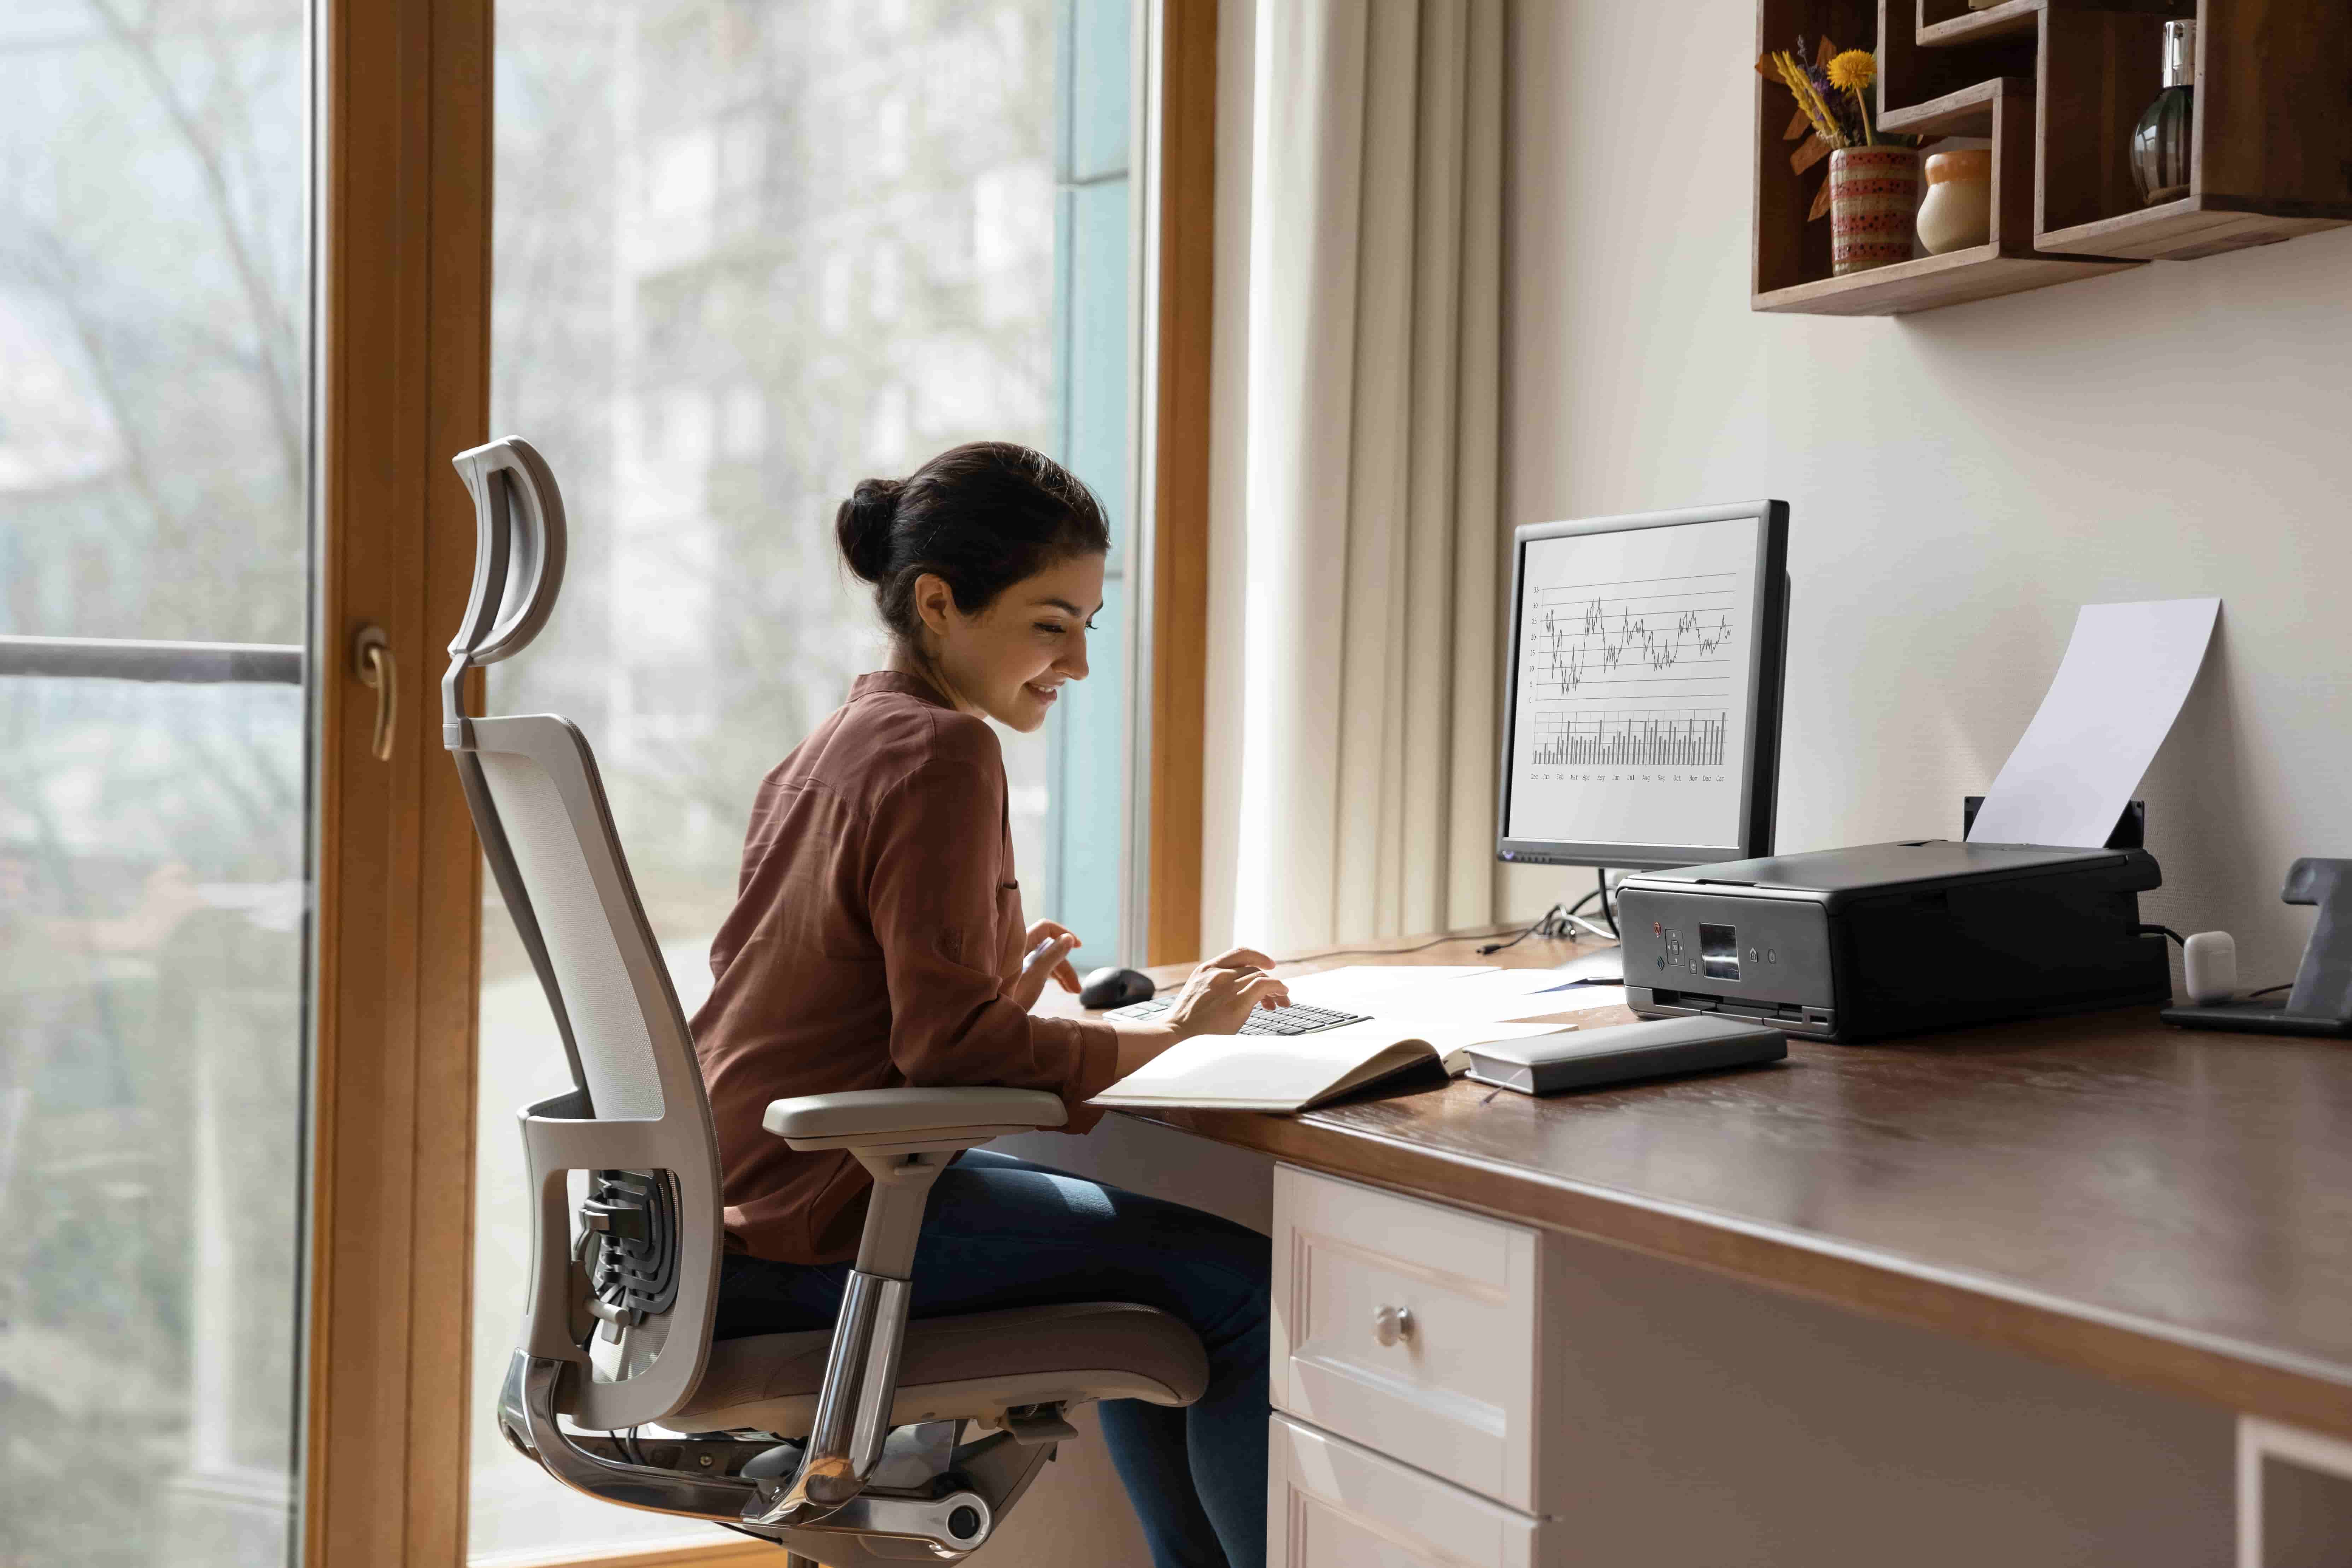 Concentrated young indian ethnicity woman sitting in comfortable adjustable ergonomic armchair with lumbar support, studying or working on computer in modern home office. distant workday concept.